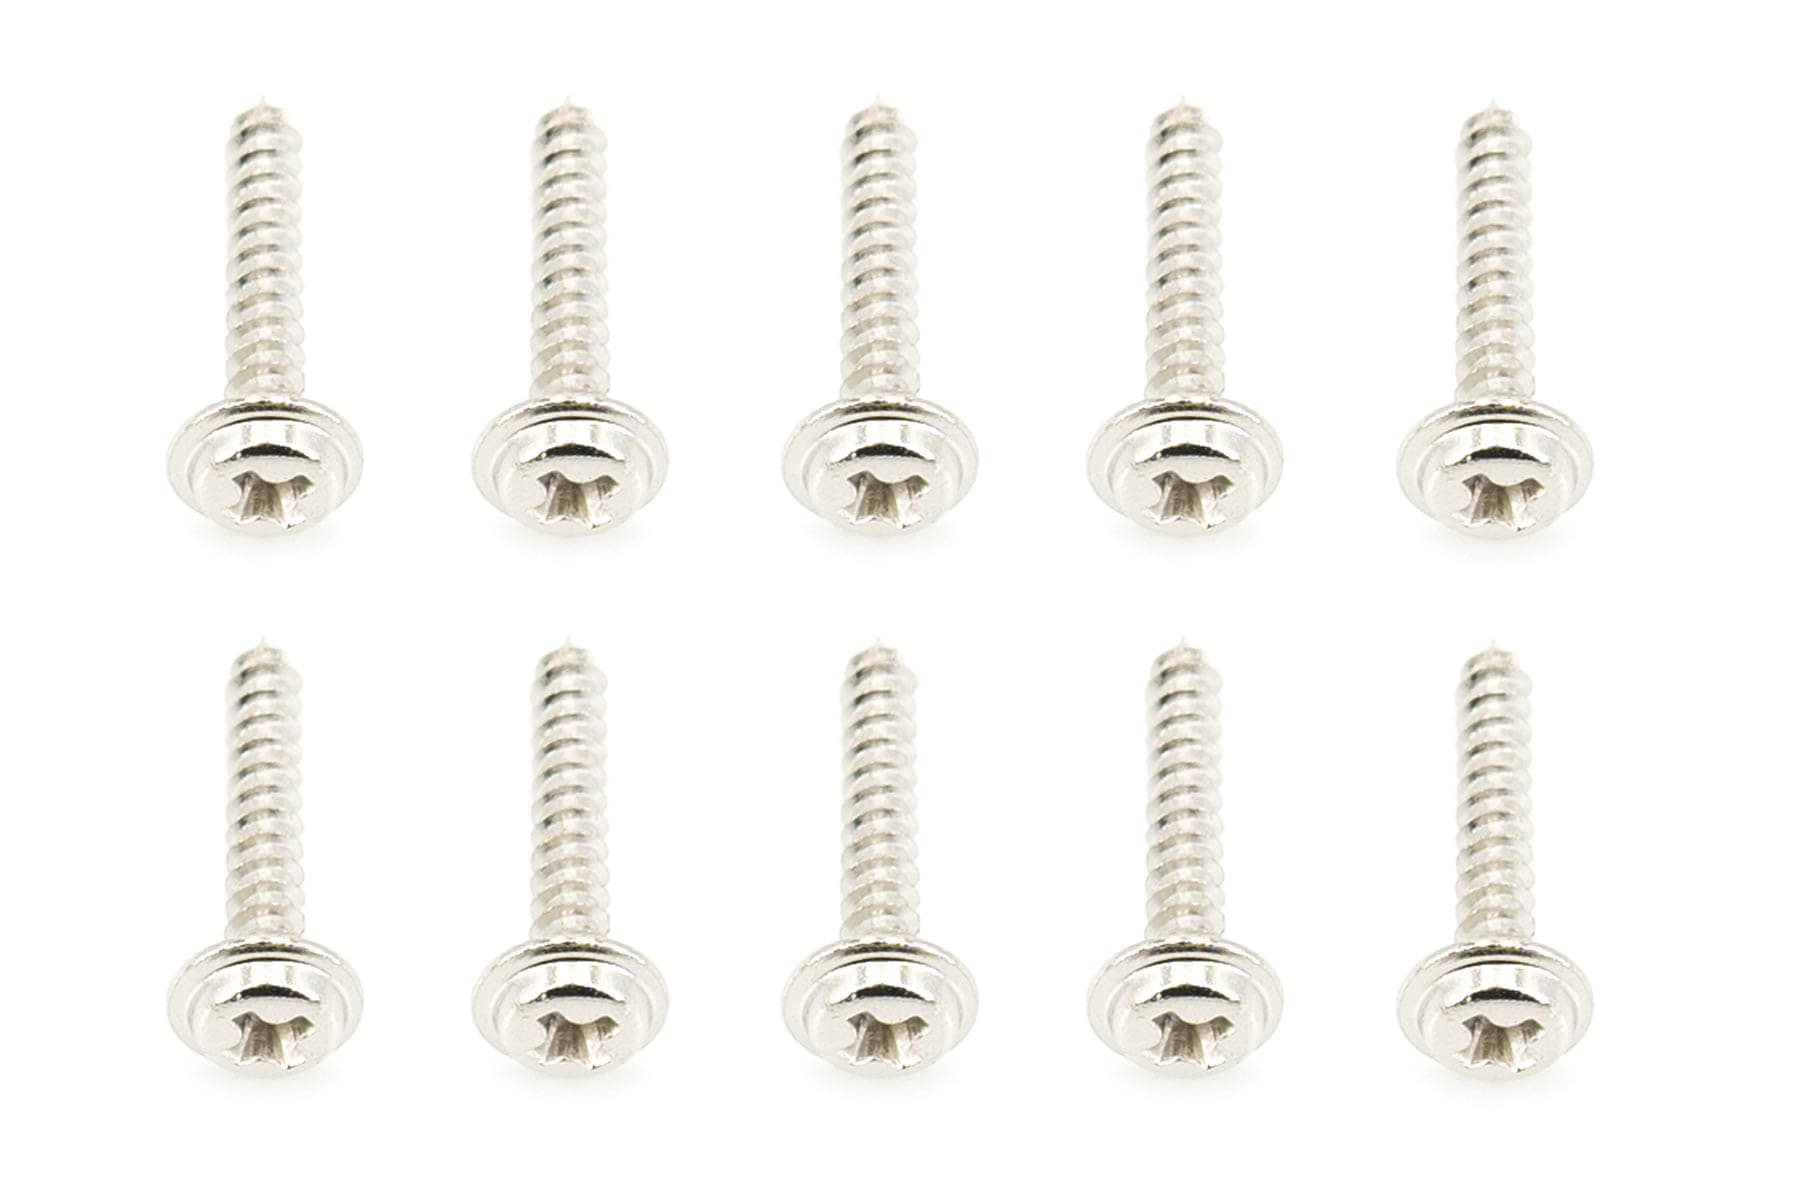 BenchCraft 2mm x 12mm Self-Tapping Washer Head Screws (10 Pack)